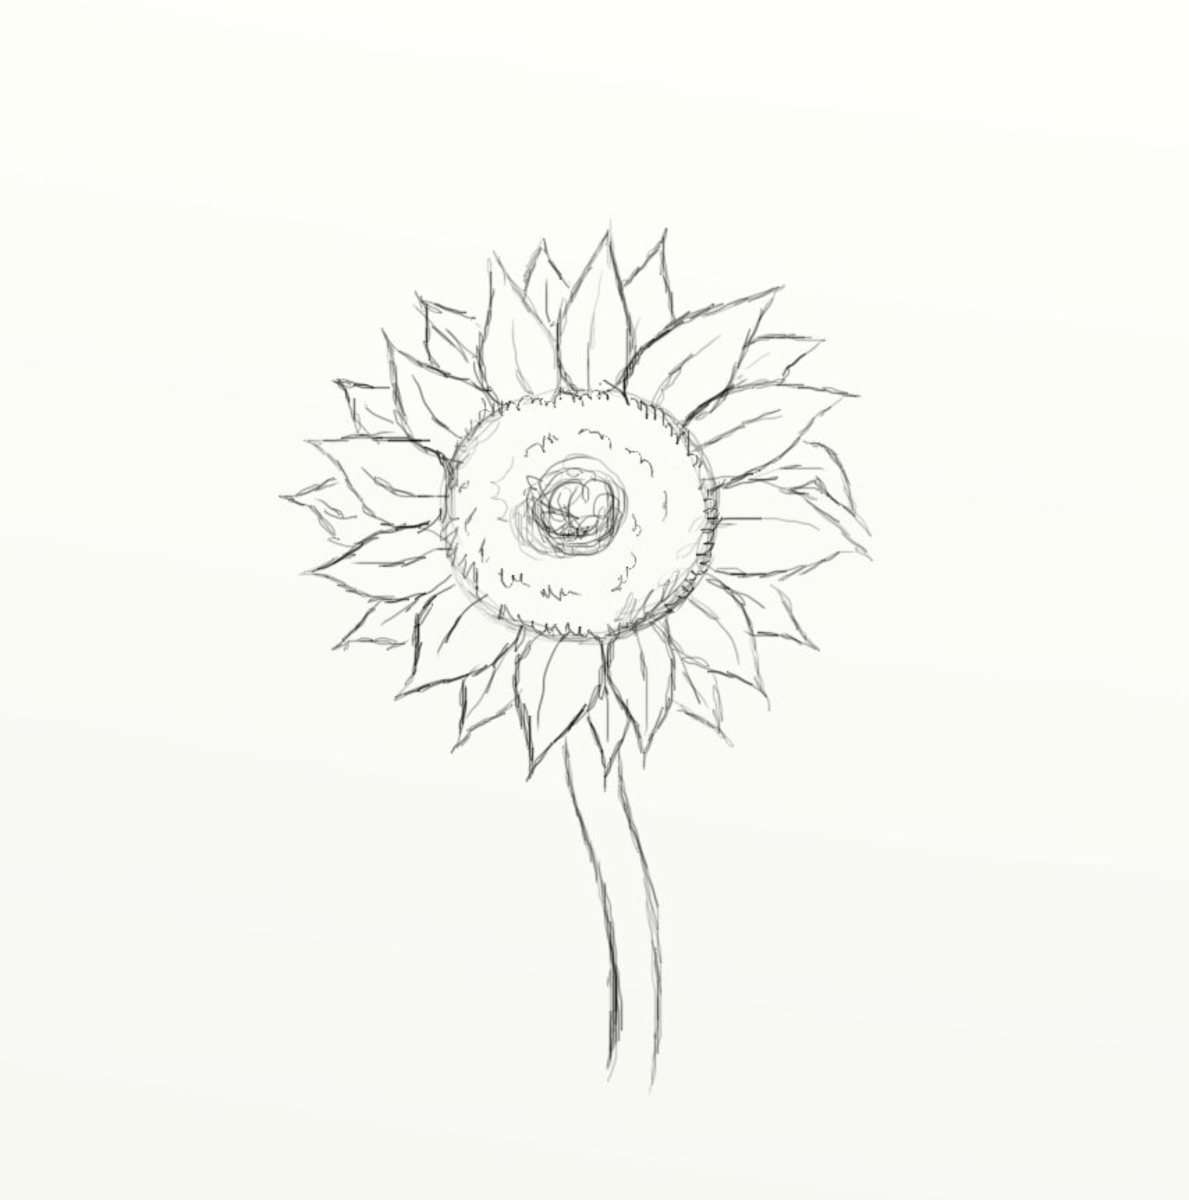 Best Sketch How To Draw A Sunflower for Beginner